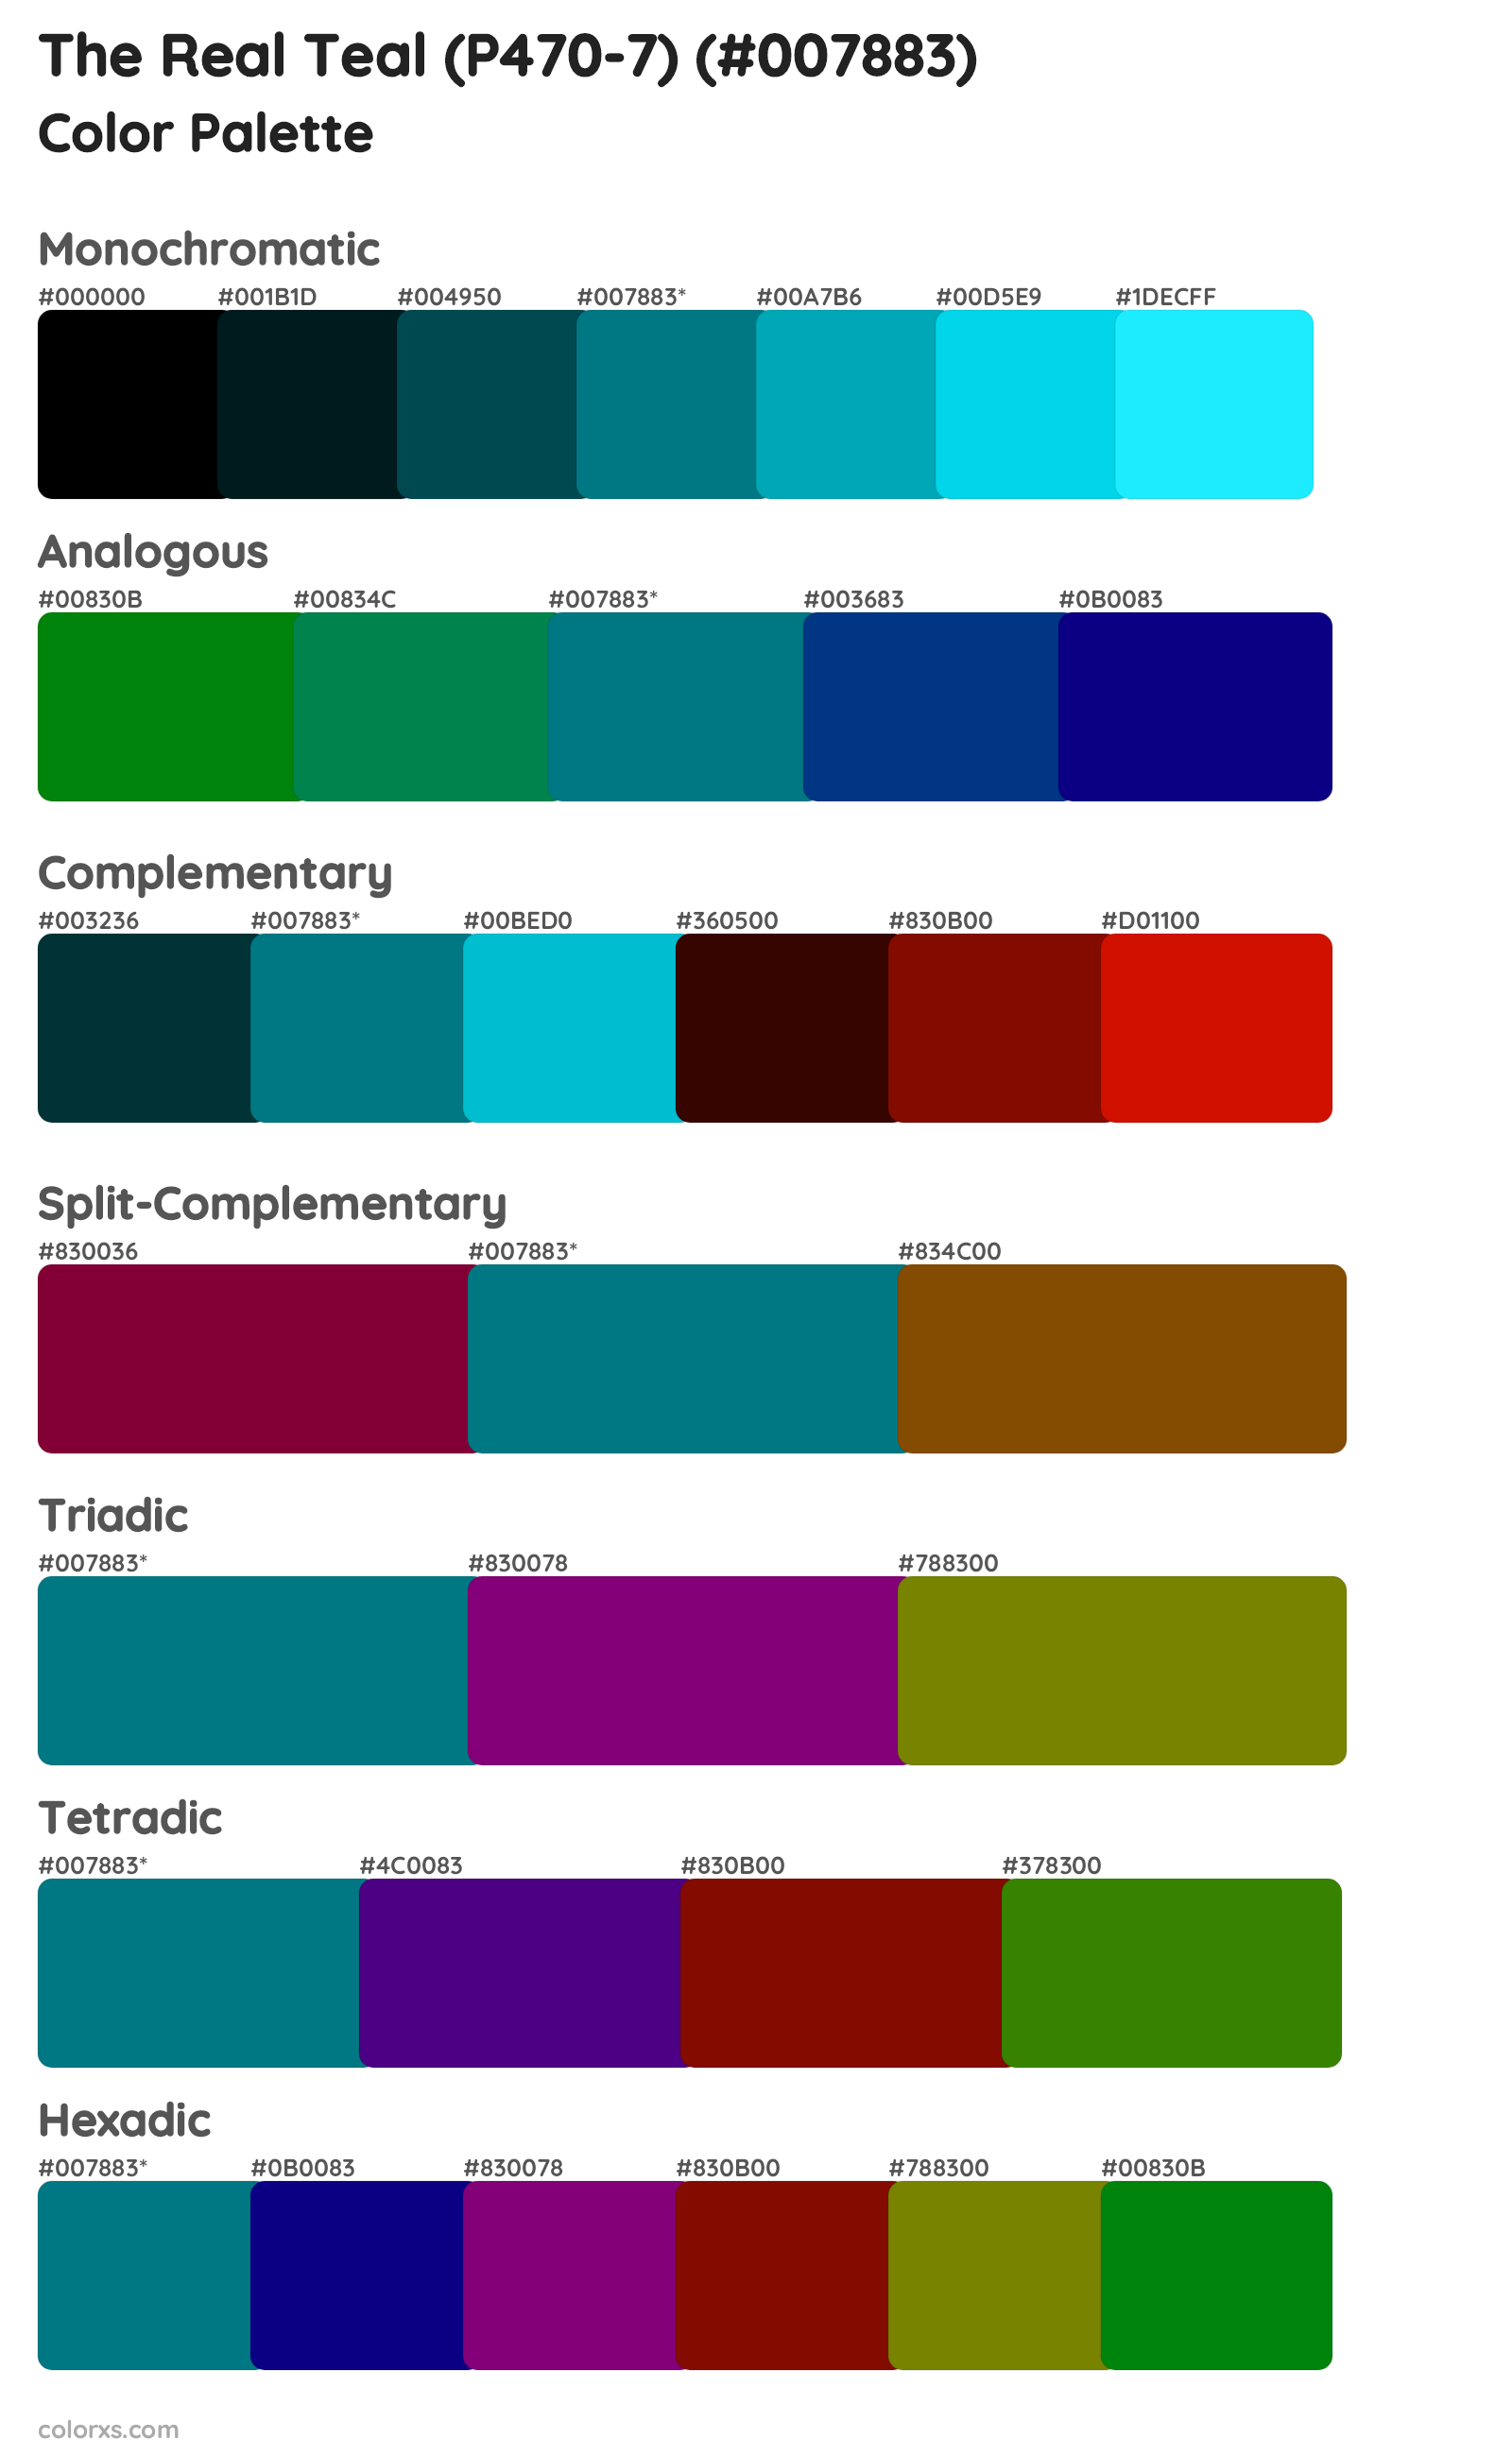 The Real Teal (P470-7) Color Scheme Palettes